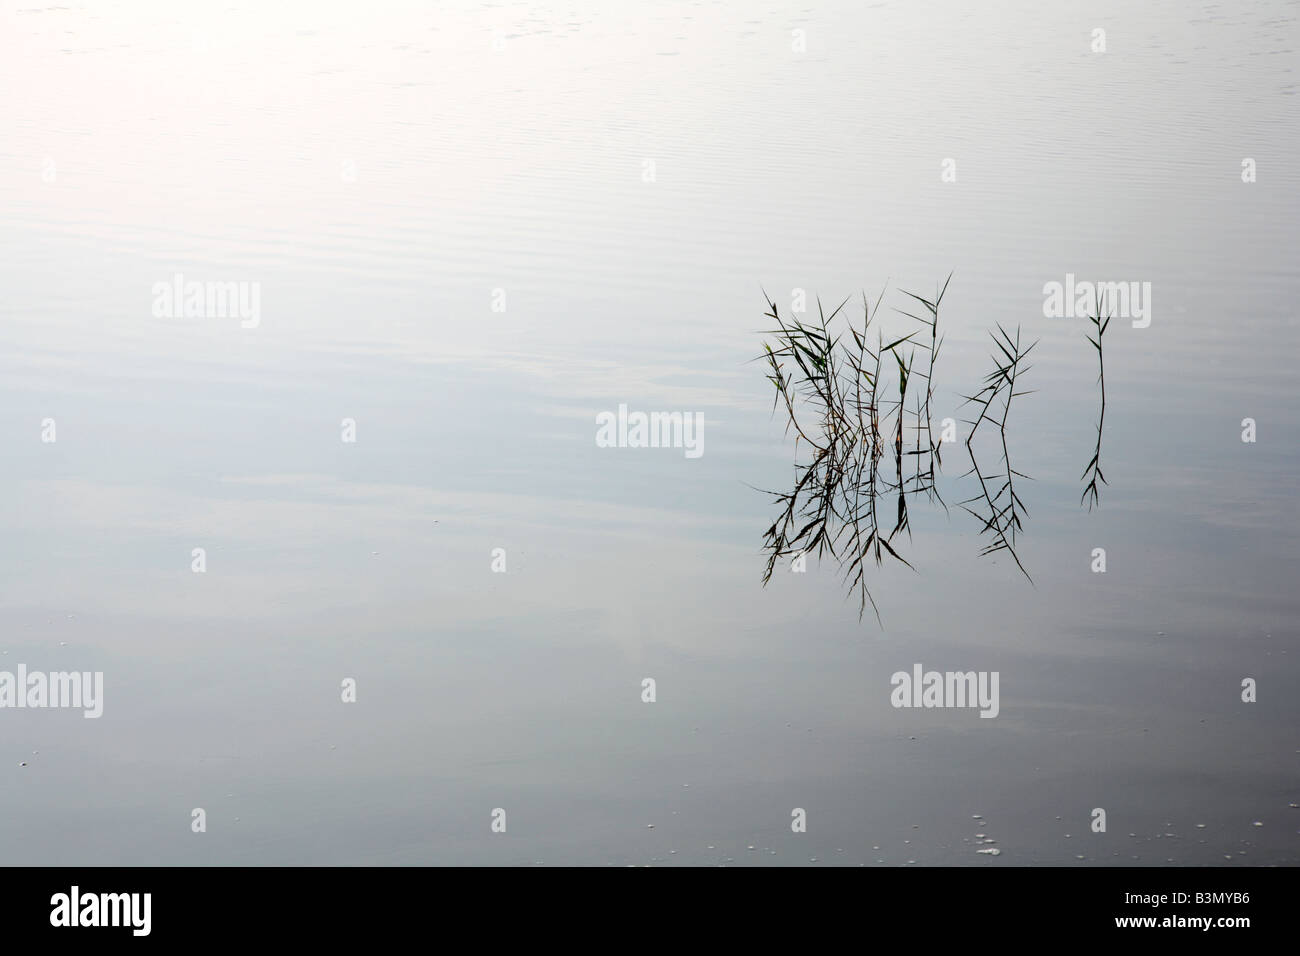 Group of reeds with reflections on still water positioned on vertical third. Stock Photo